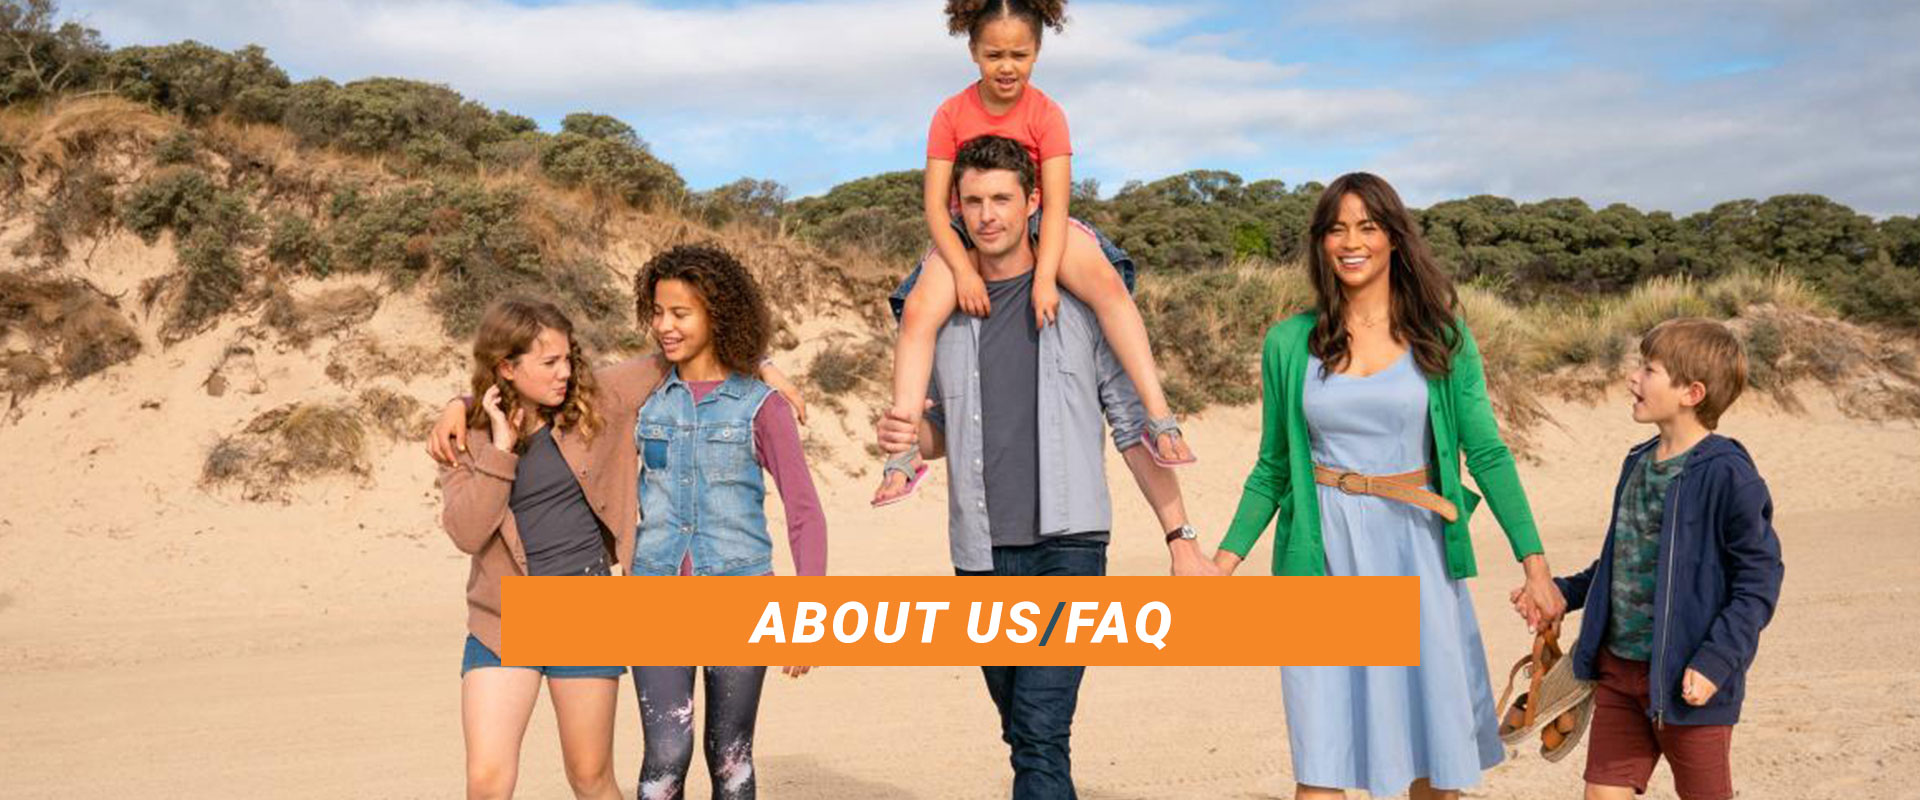 About Us / FAQs